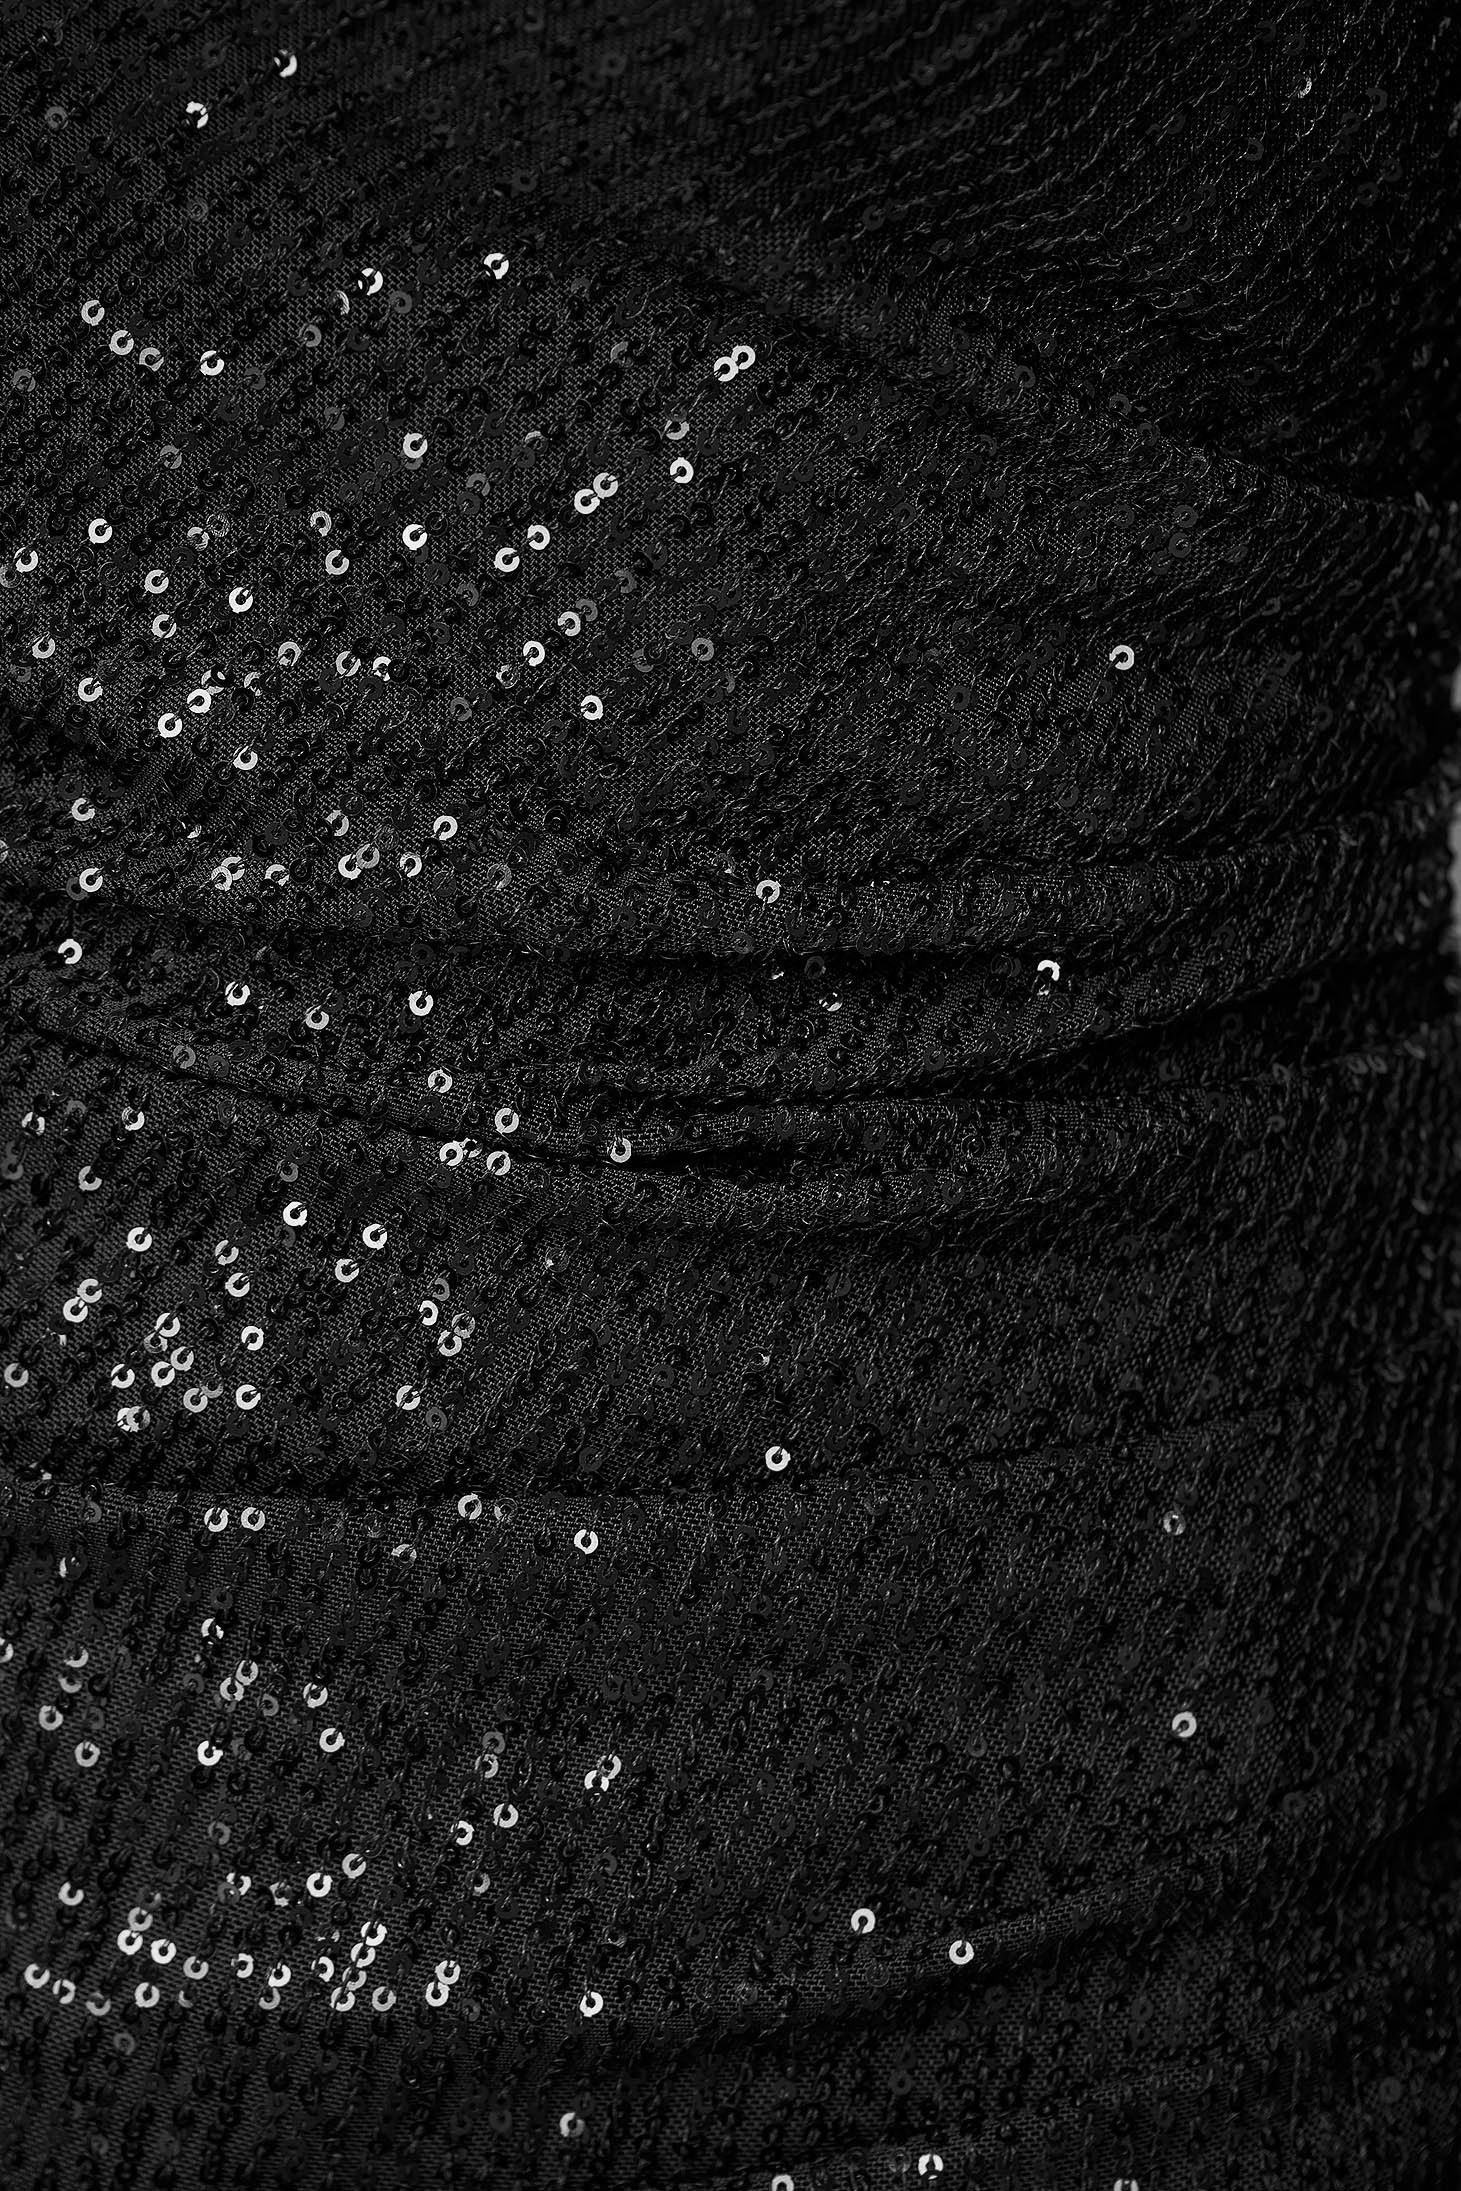 Black dress with sequins midi pencil pleats of material - StarShinerS 4 - StarShinerS.com